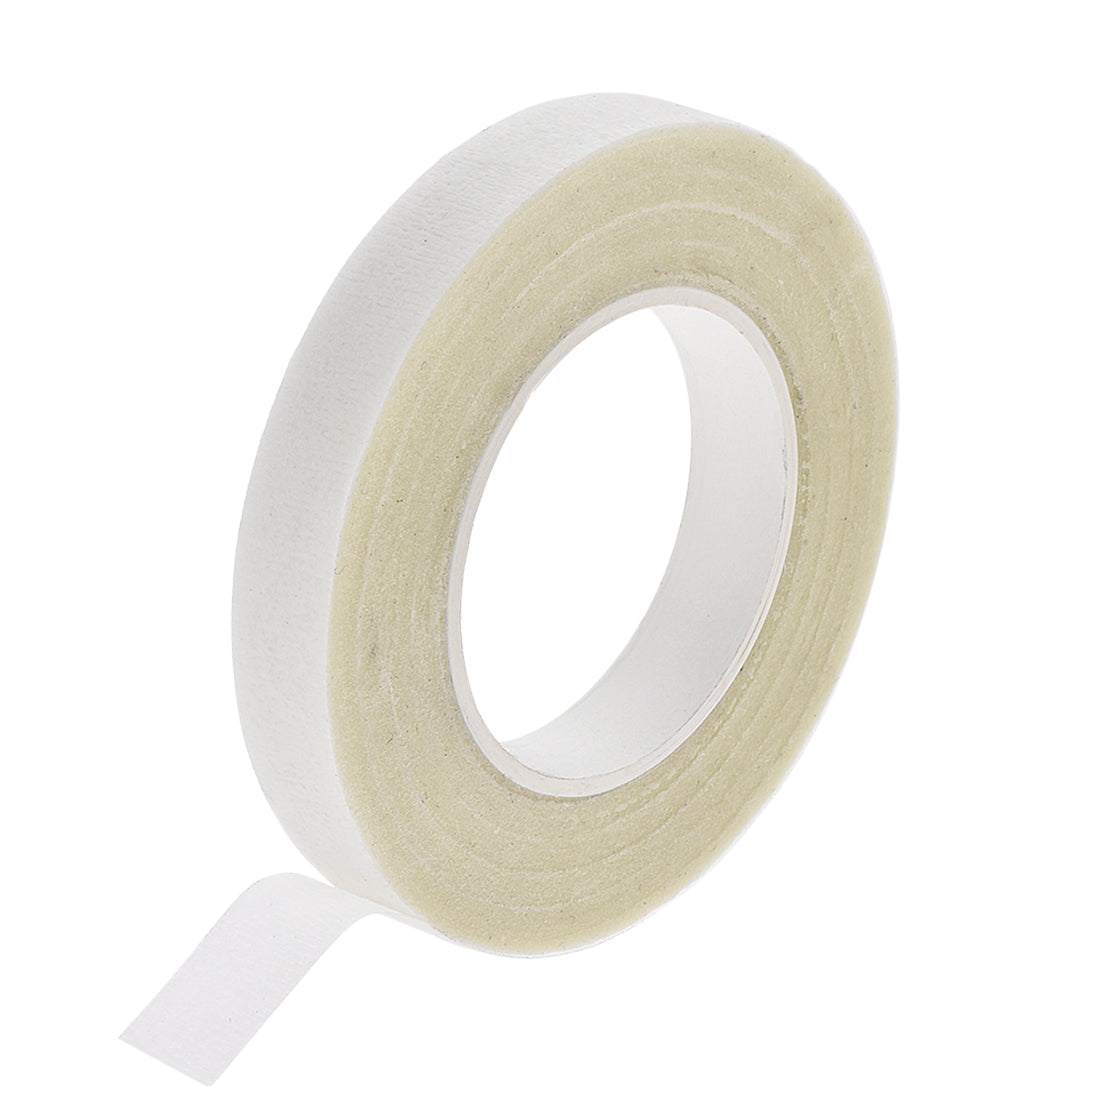 uxcell Uxcell 1Roll 1/2"x30Yard White Floral Tape Flower Adhesives Floral Arrangement Kit